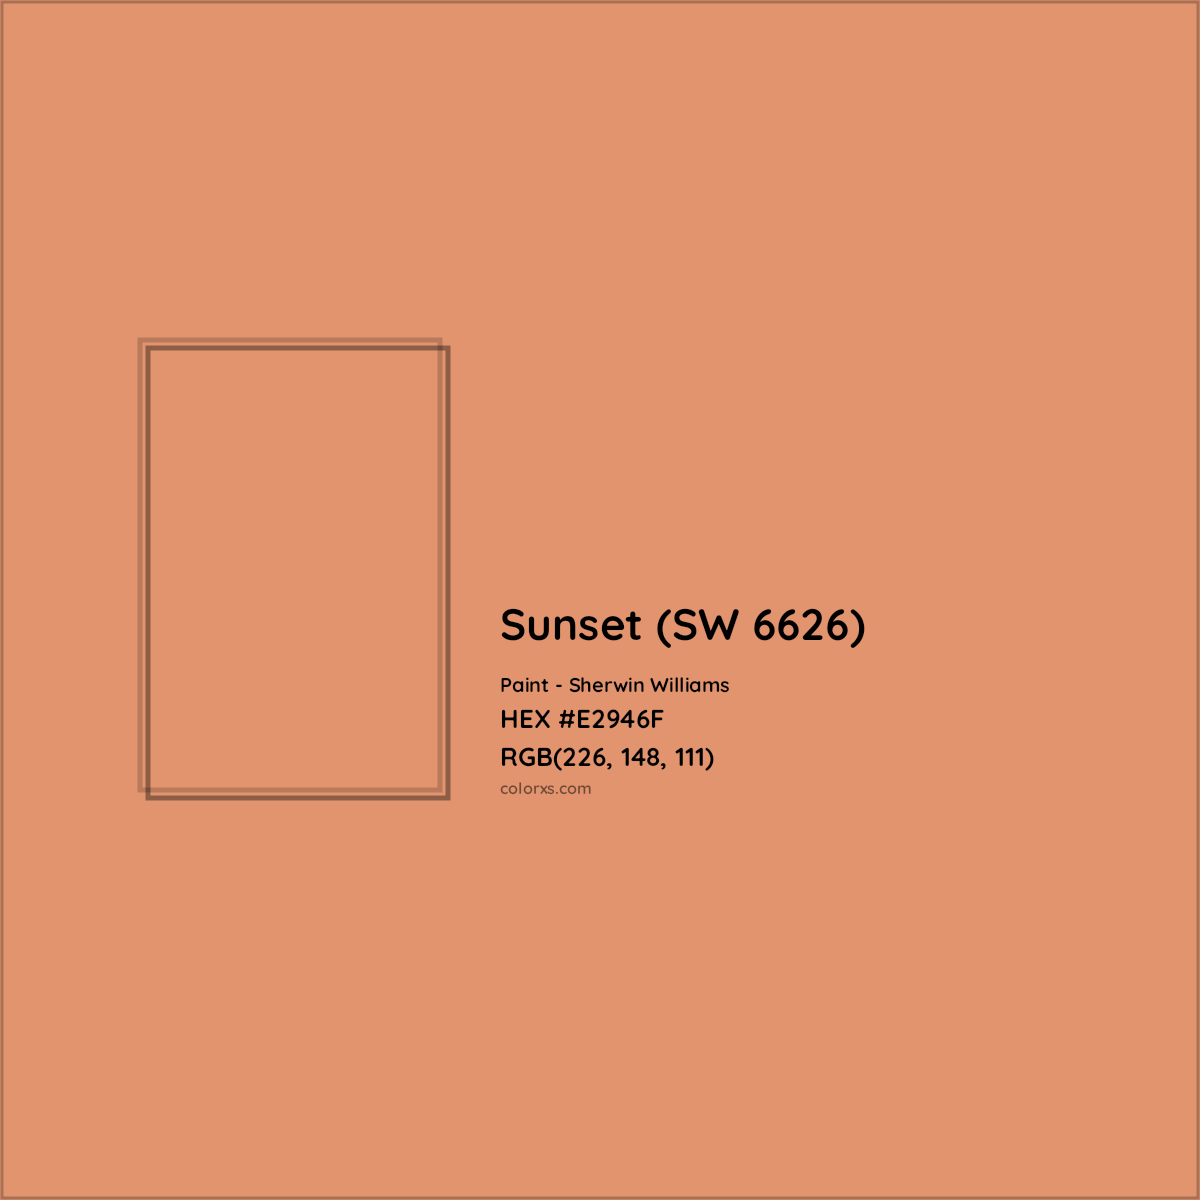 HEX #E2946F Sunset (SW 6626) Paint Sherwin Williams - Color Code